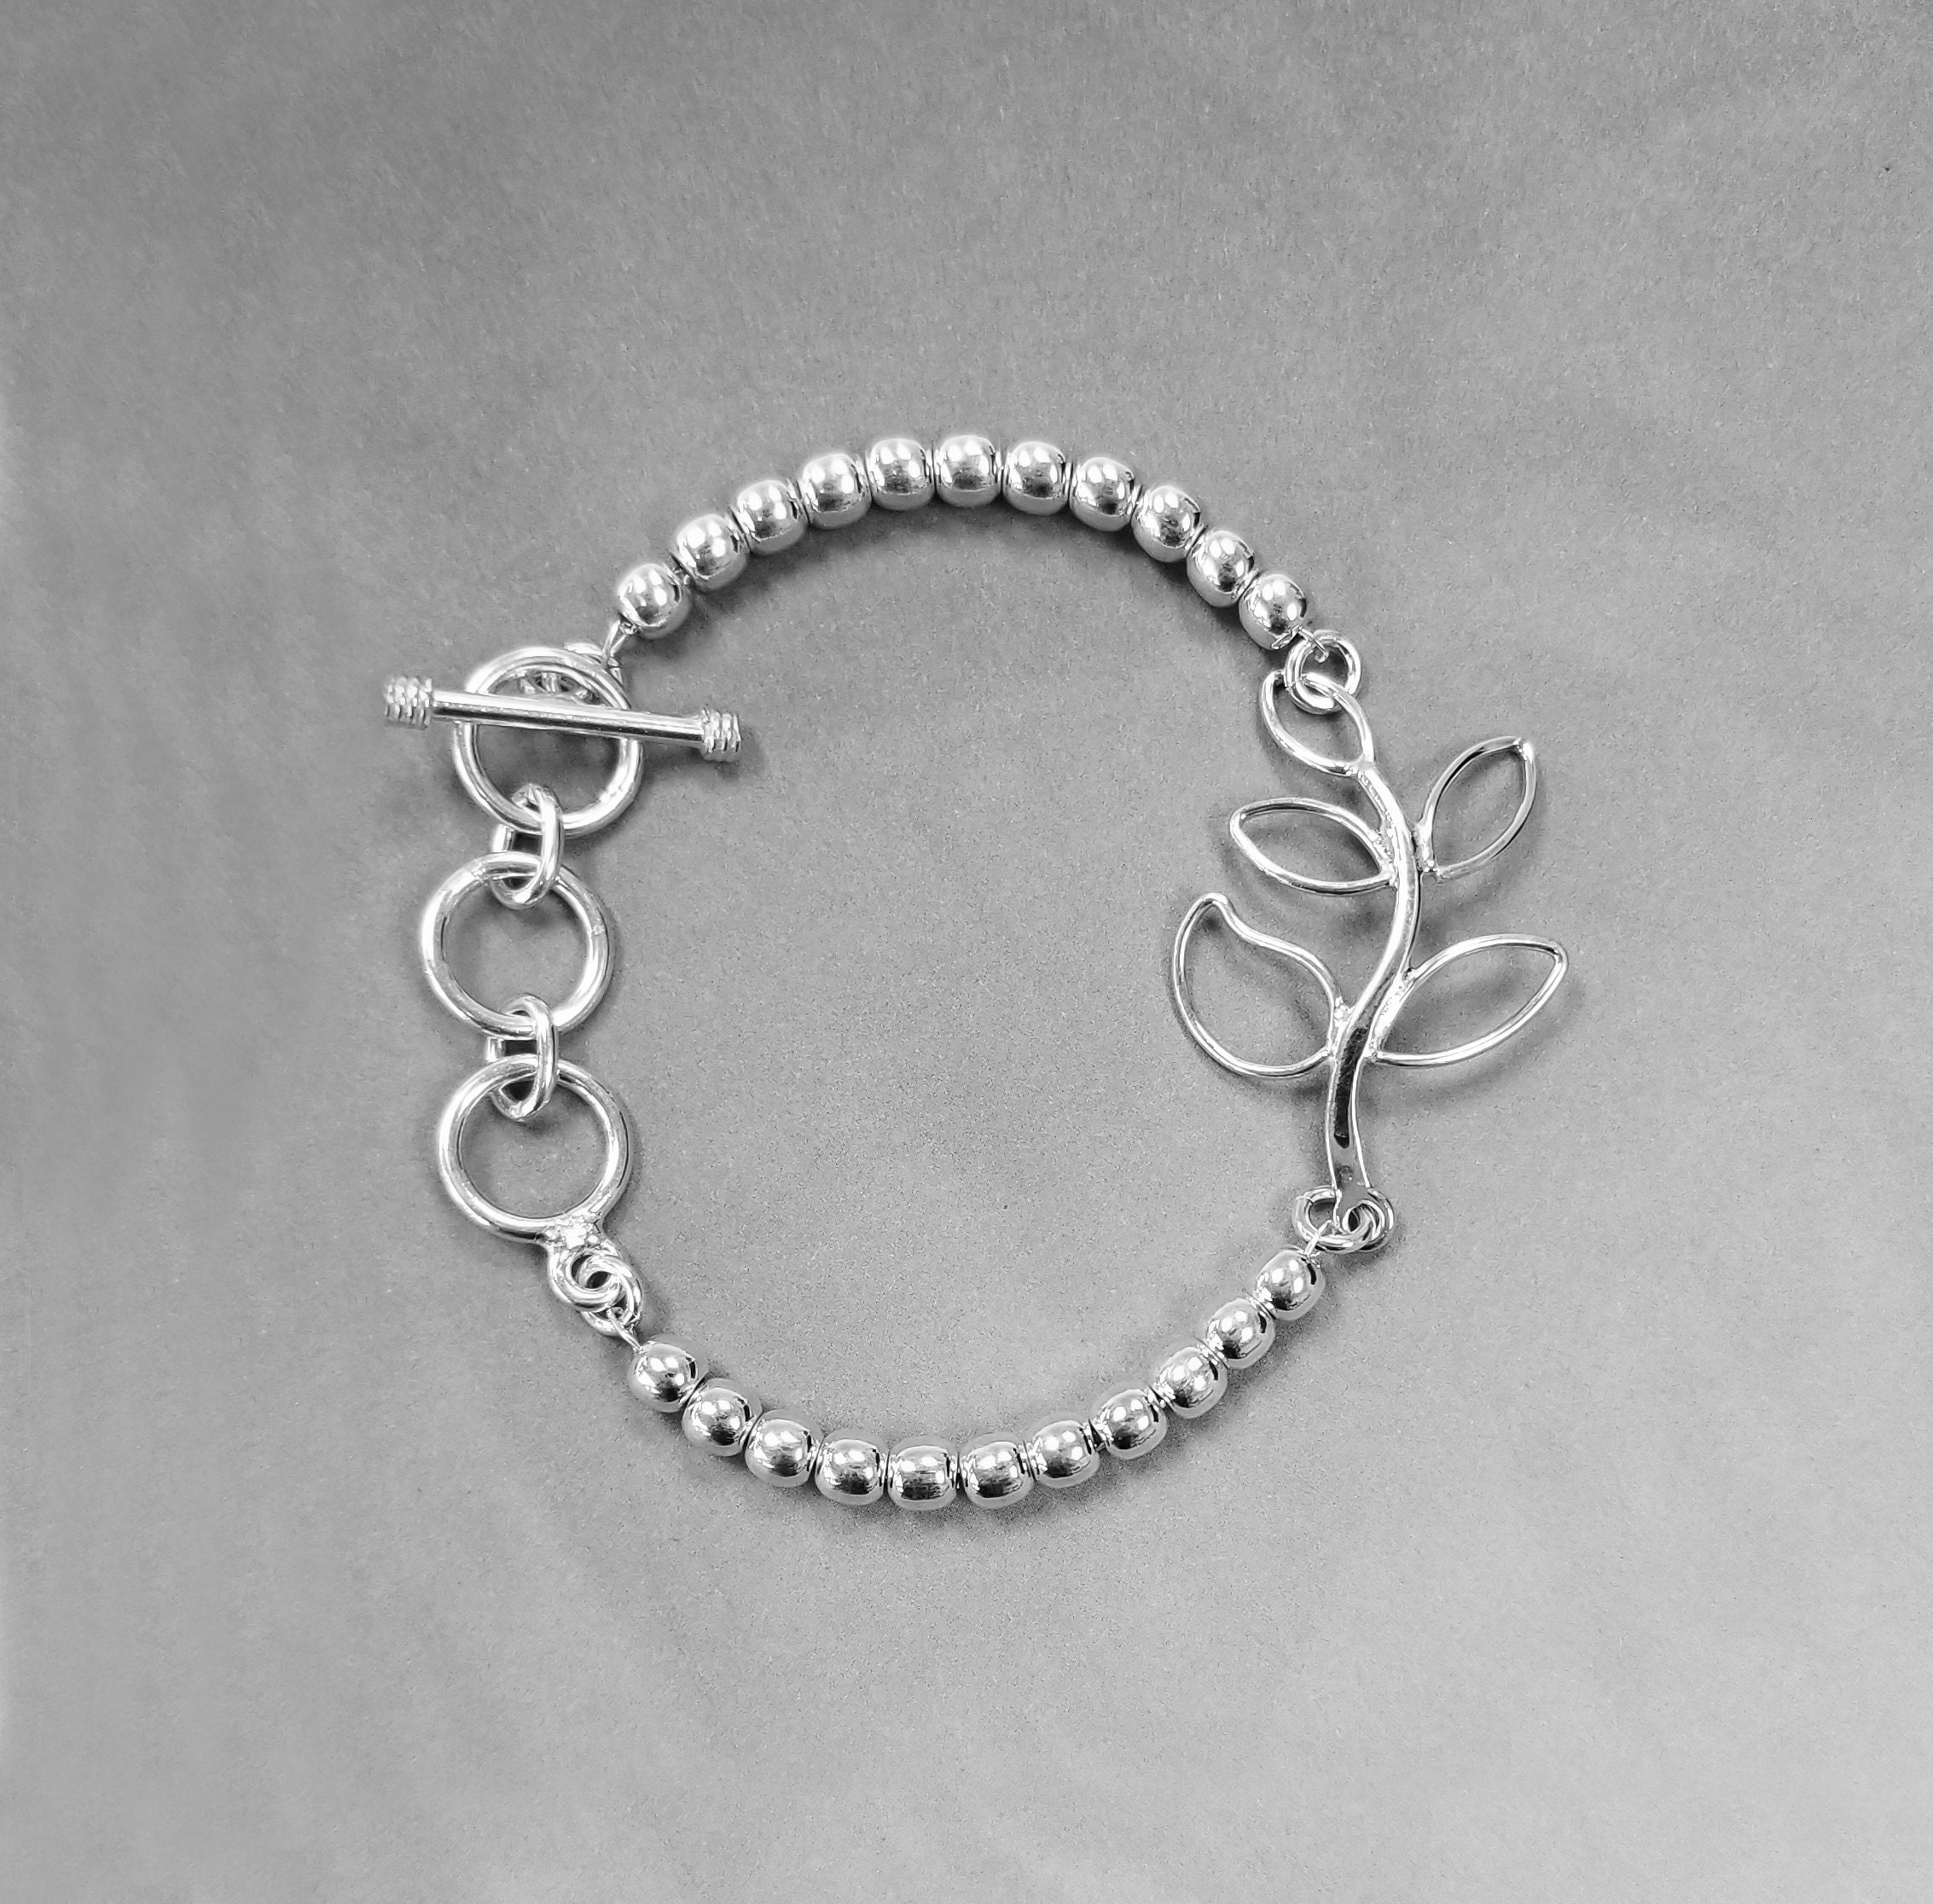 1 Extension CloseoutWarehouse Sterling Silver Tree Of Life Beaded Bracelet 6.5